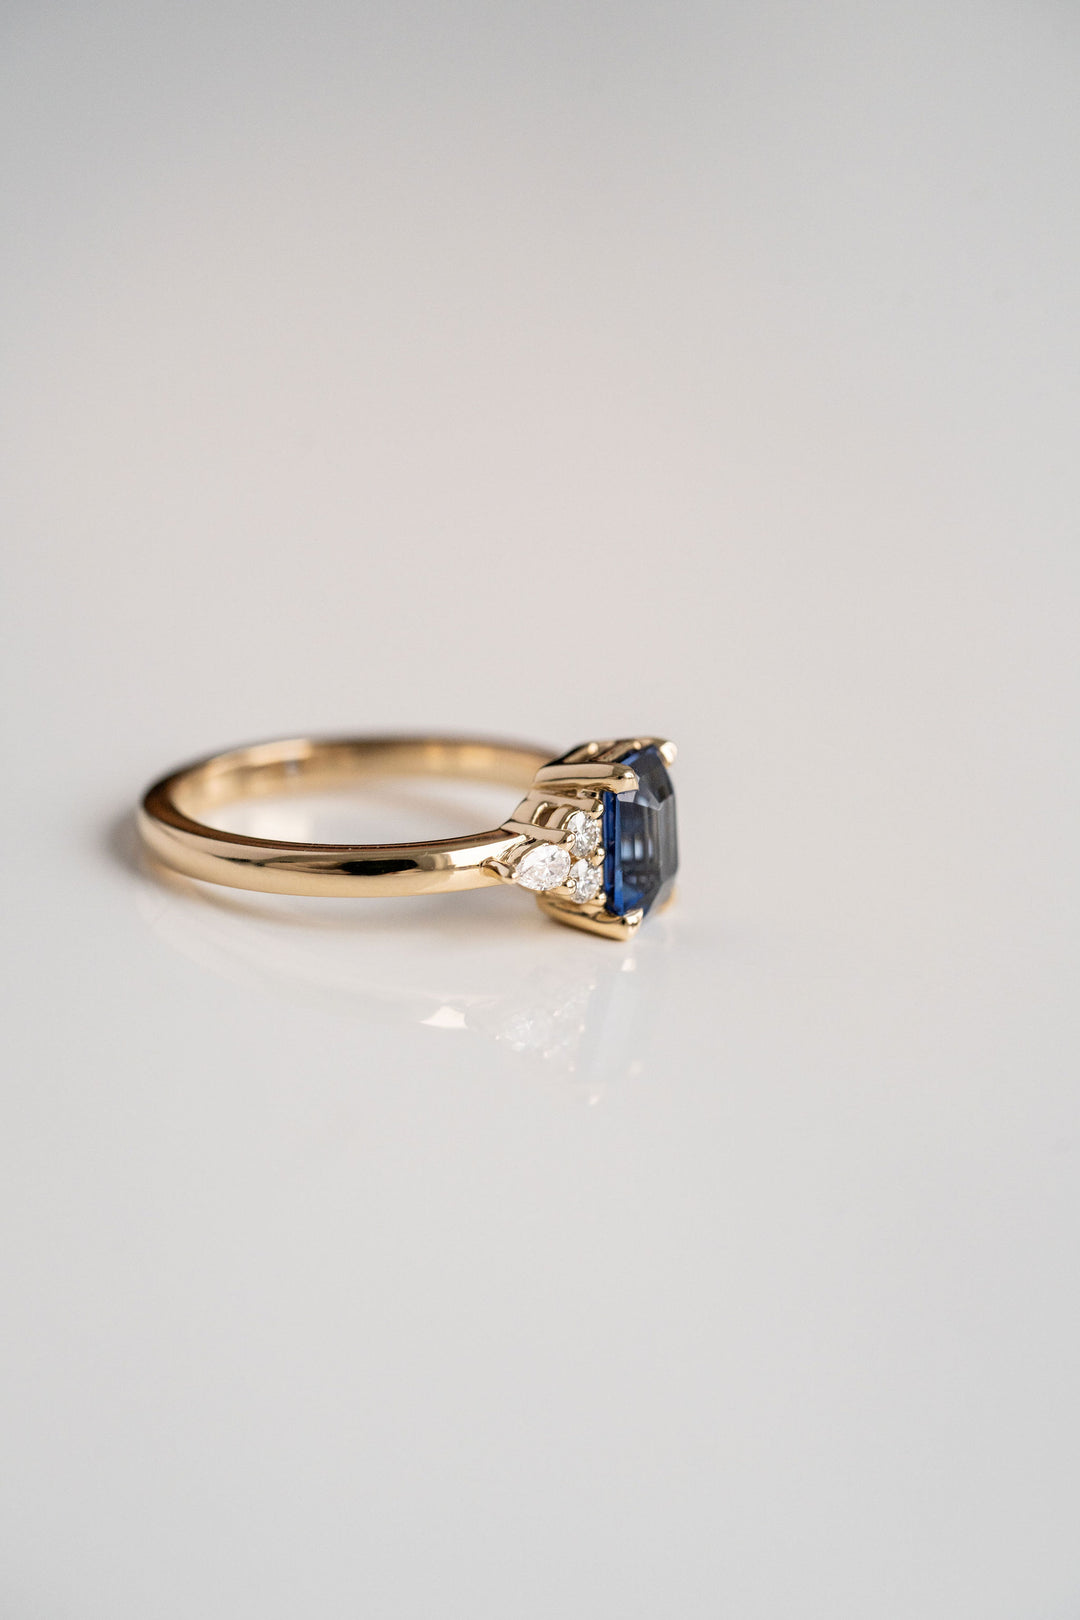 1.60ct. Emerald Cut Blue Sri Lankan Sapphire Engagement Ring With Diamond Cluster Accents, 14k Yellow Gold